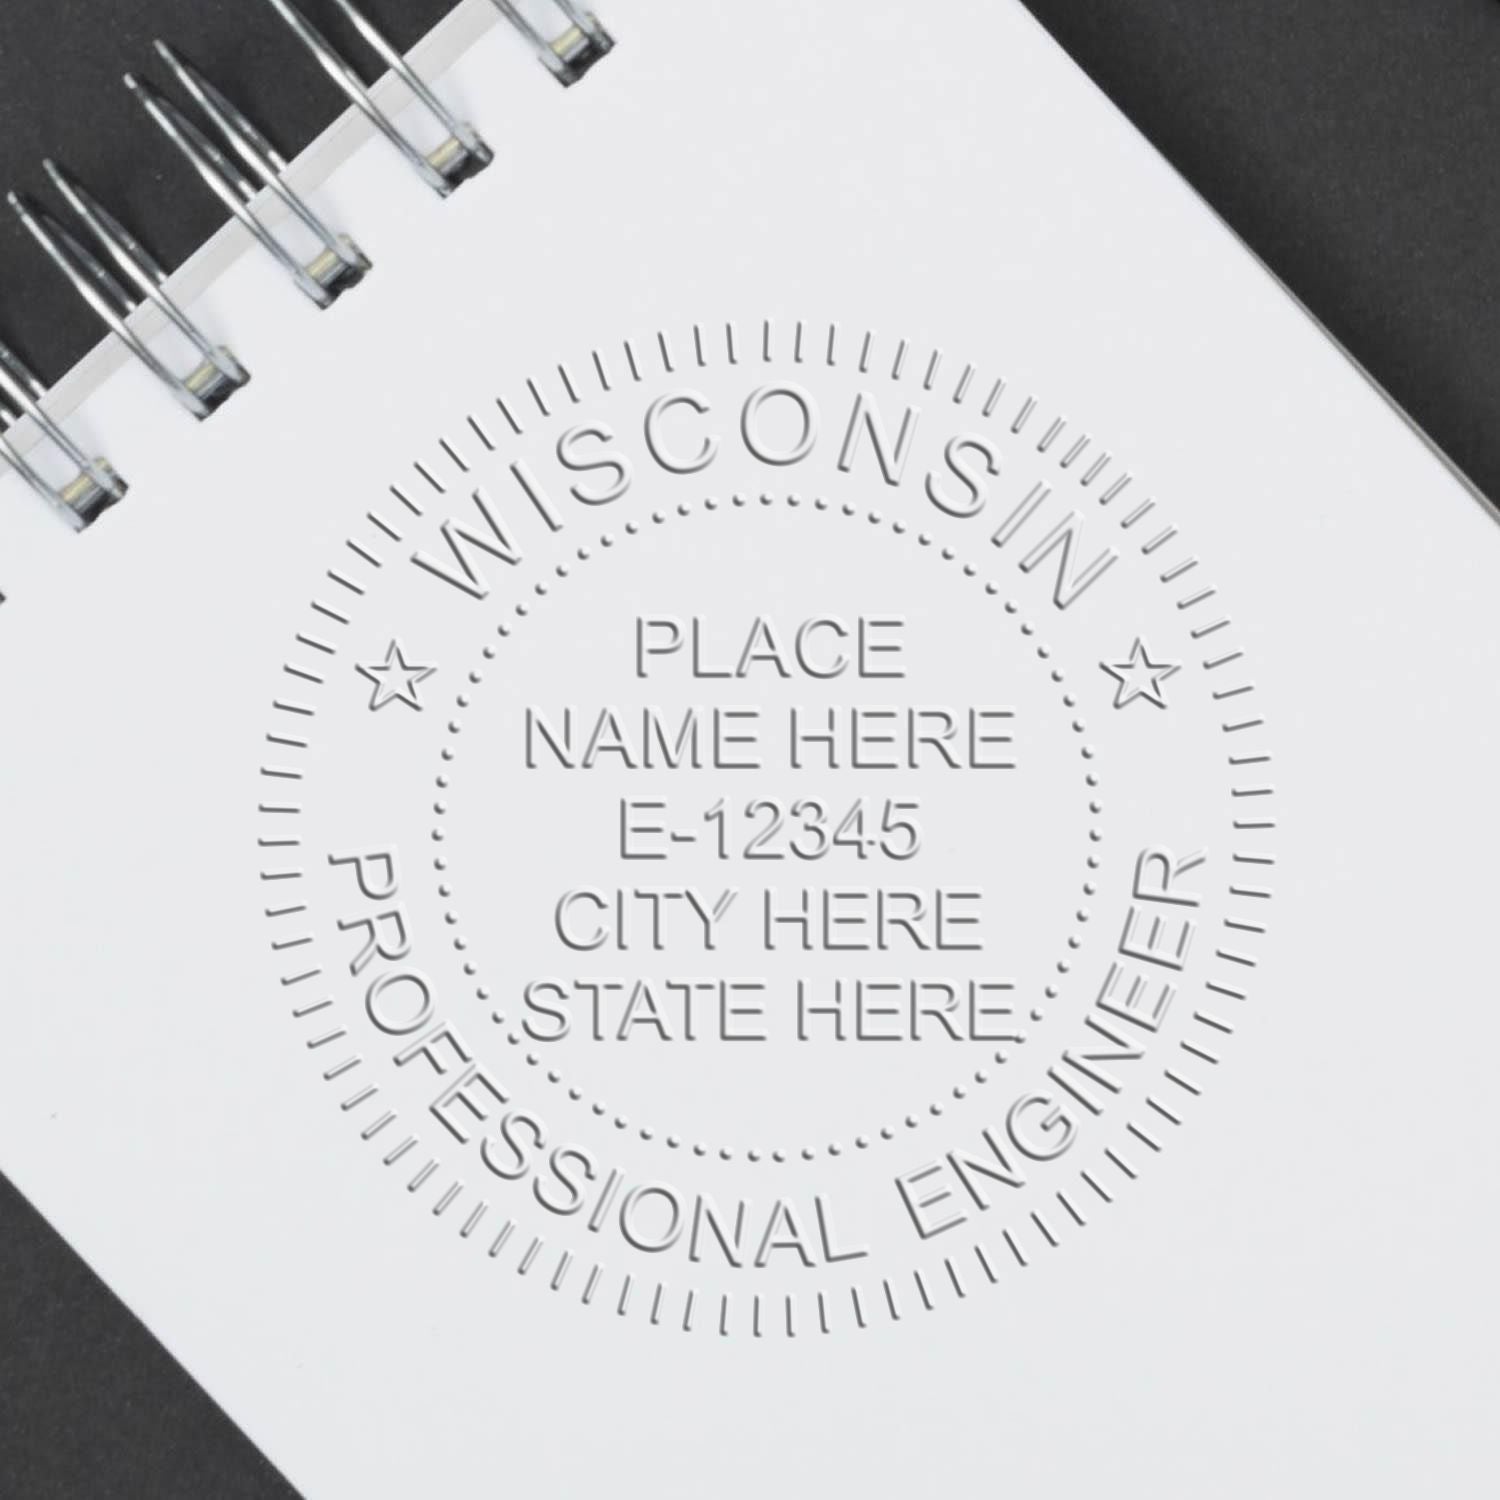 A photograph of the Soft Wisconsin Professional Engineer Seal stamp impression reveals a vivid, professional image of the on paper.